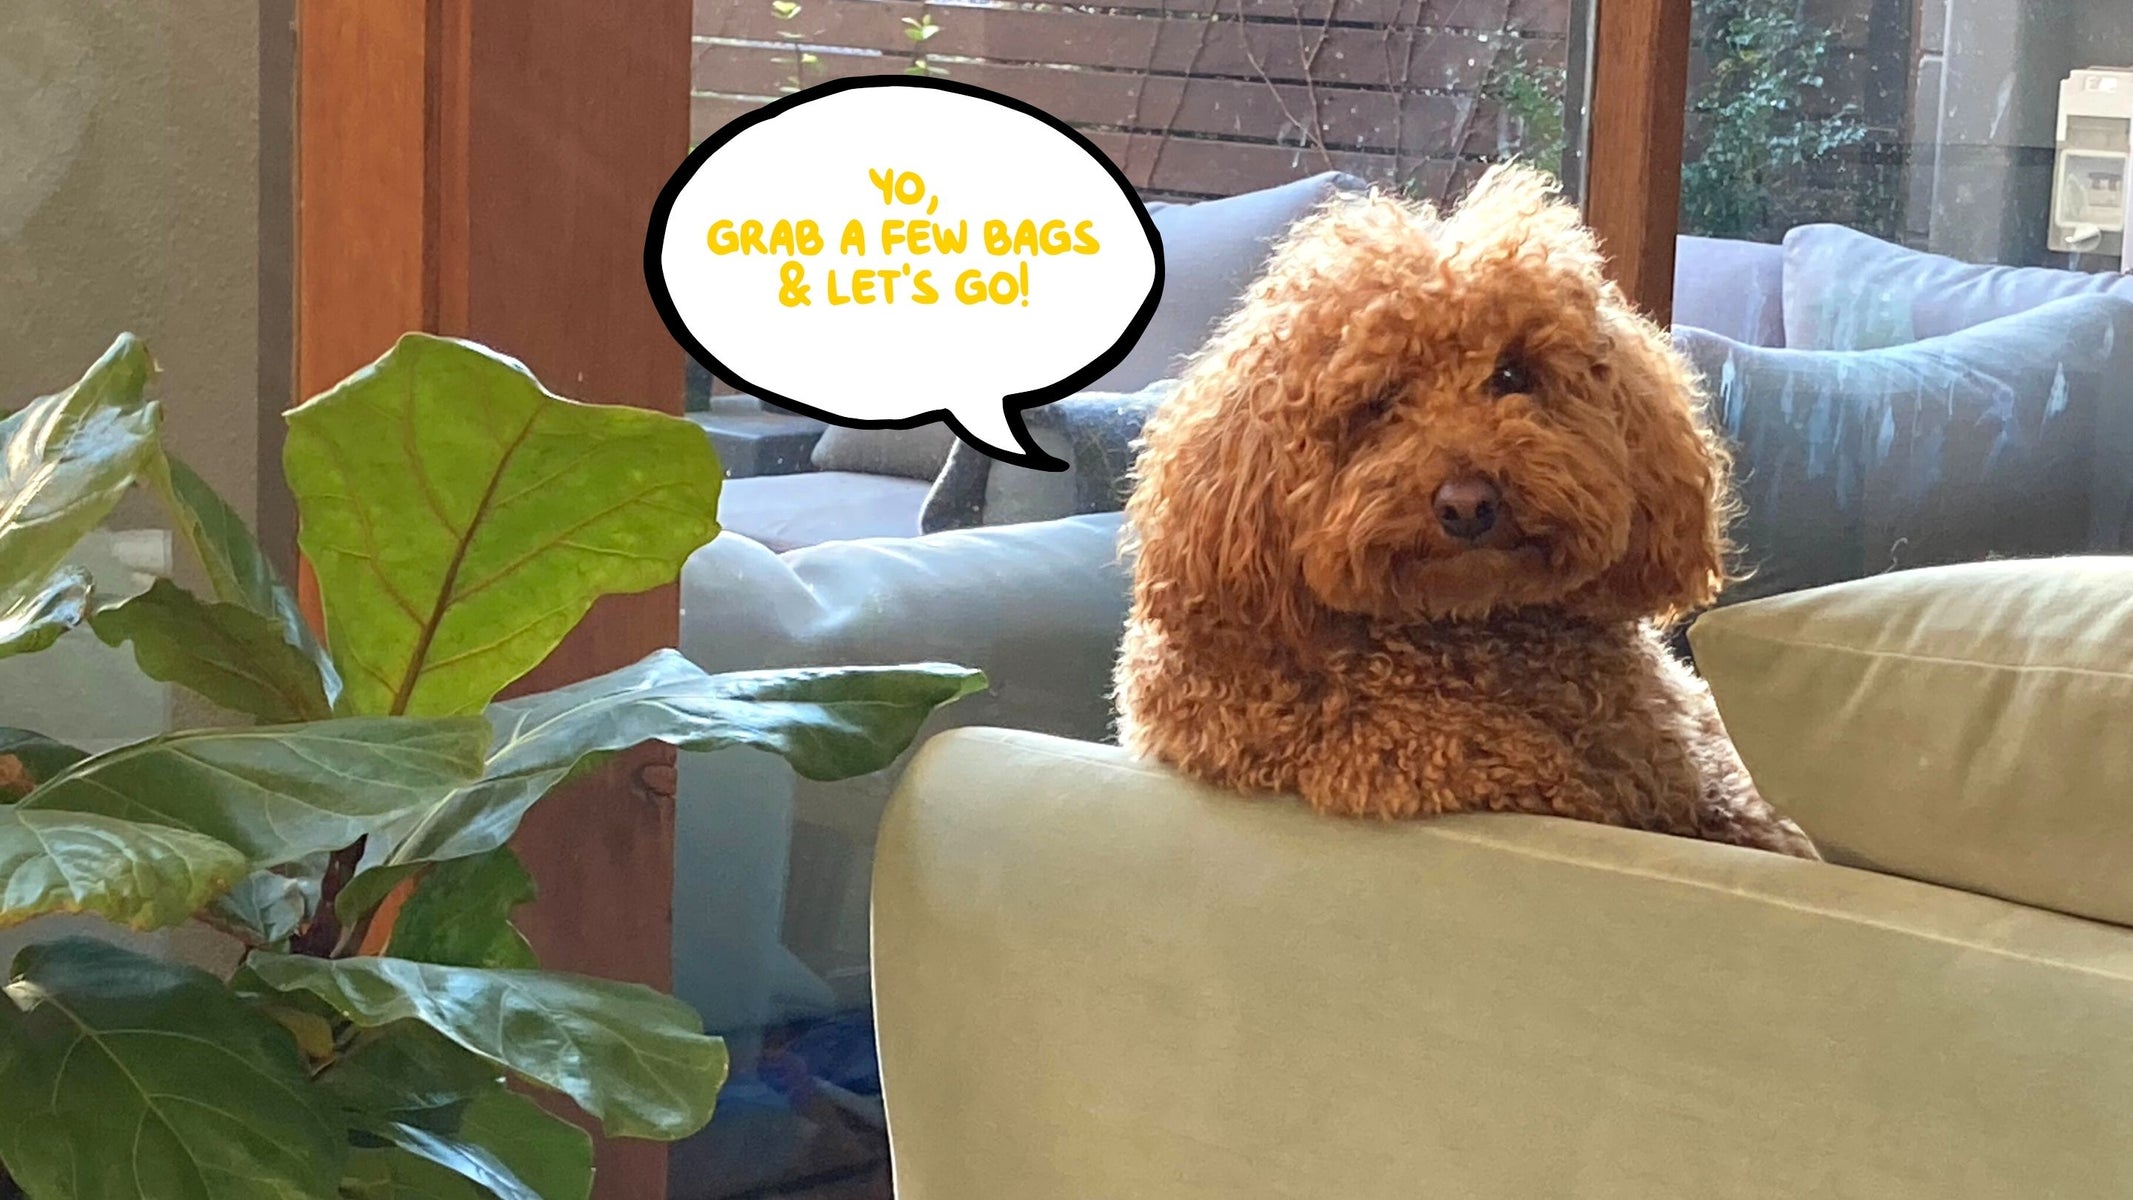 Red Toy Poodle on Jardan Sofa with Speech Bubble dog poop bags compostable biodegradable kitty litter bag